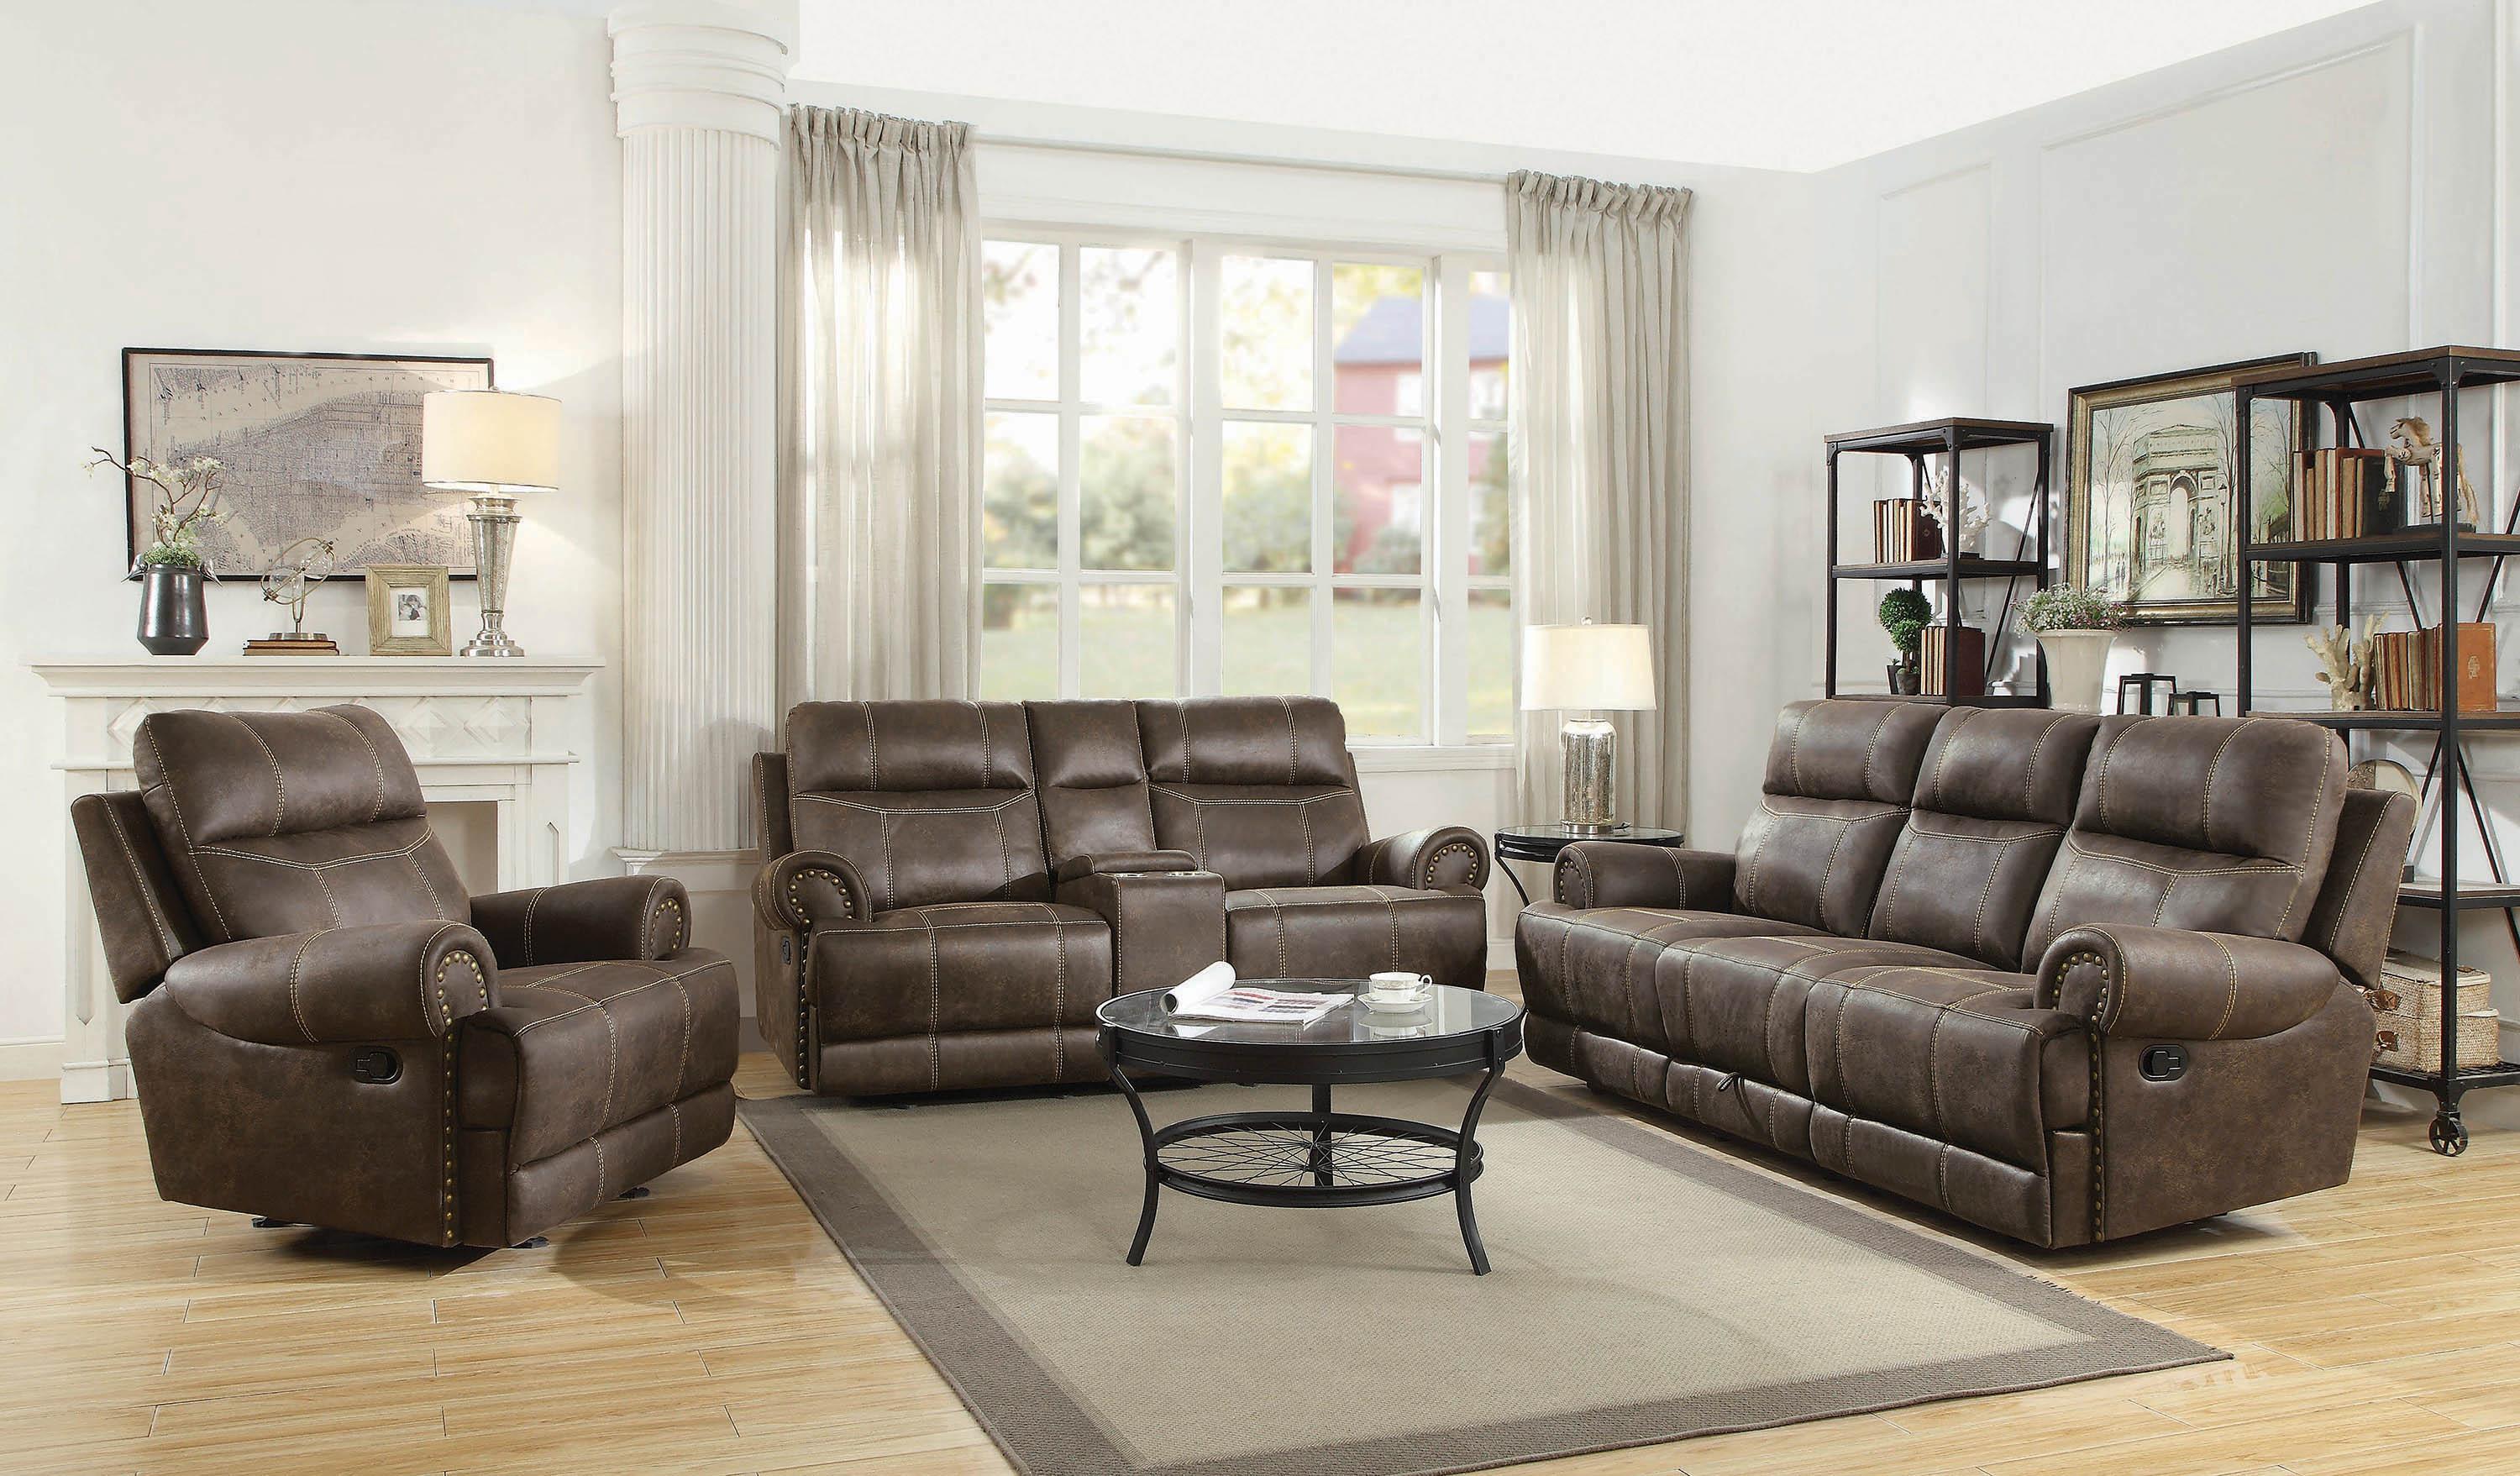 Traditional Glider loveseat Brixton 602442 in Brown Fabric